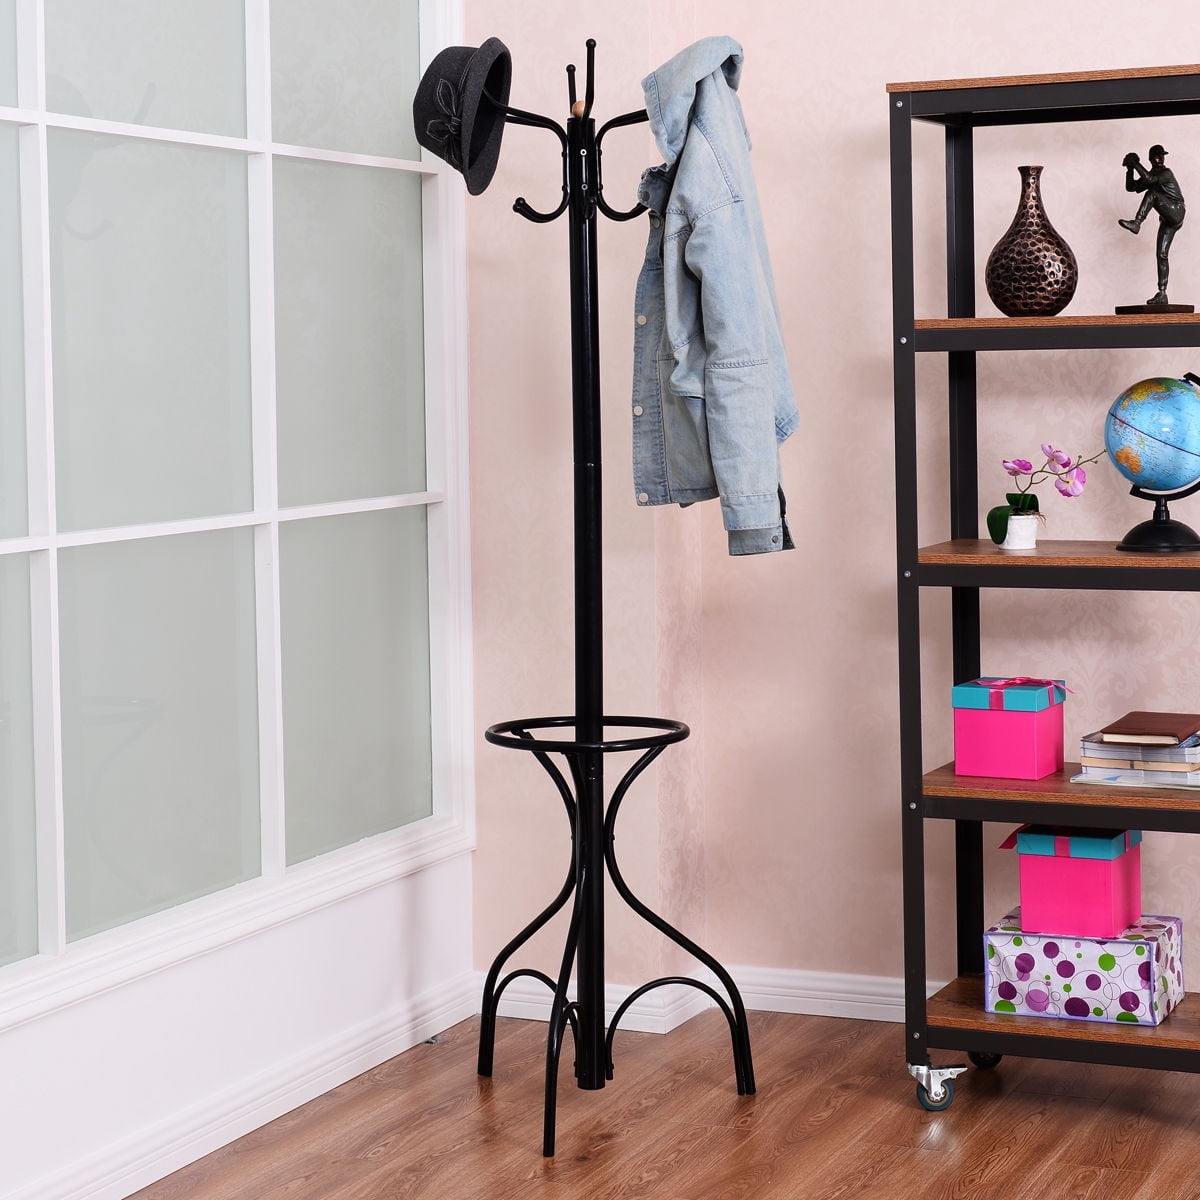 Details about   3 Tiers Coat Hat Stand Rack Metal Tree Clothes Hanger Umbrella Holder Organizer 